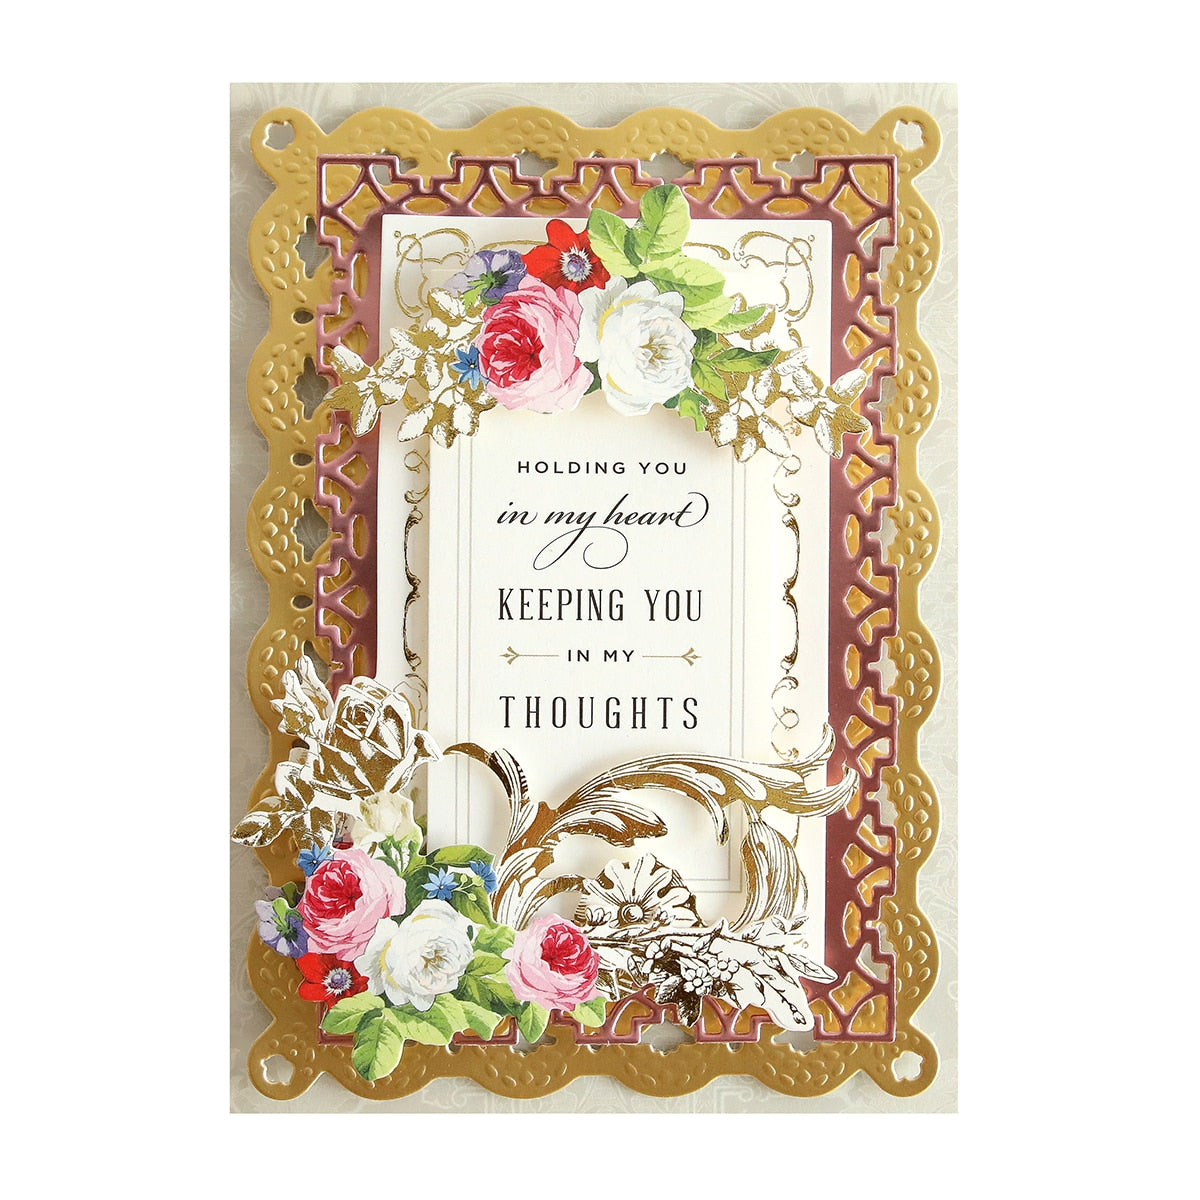 a card with flowers and a quote on it.